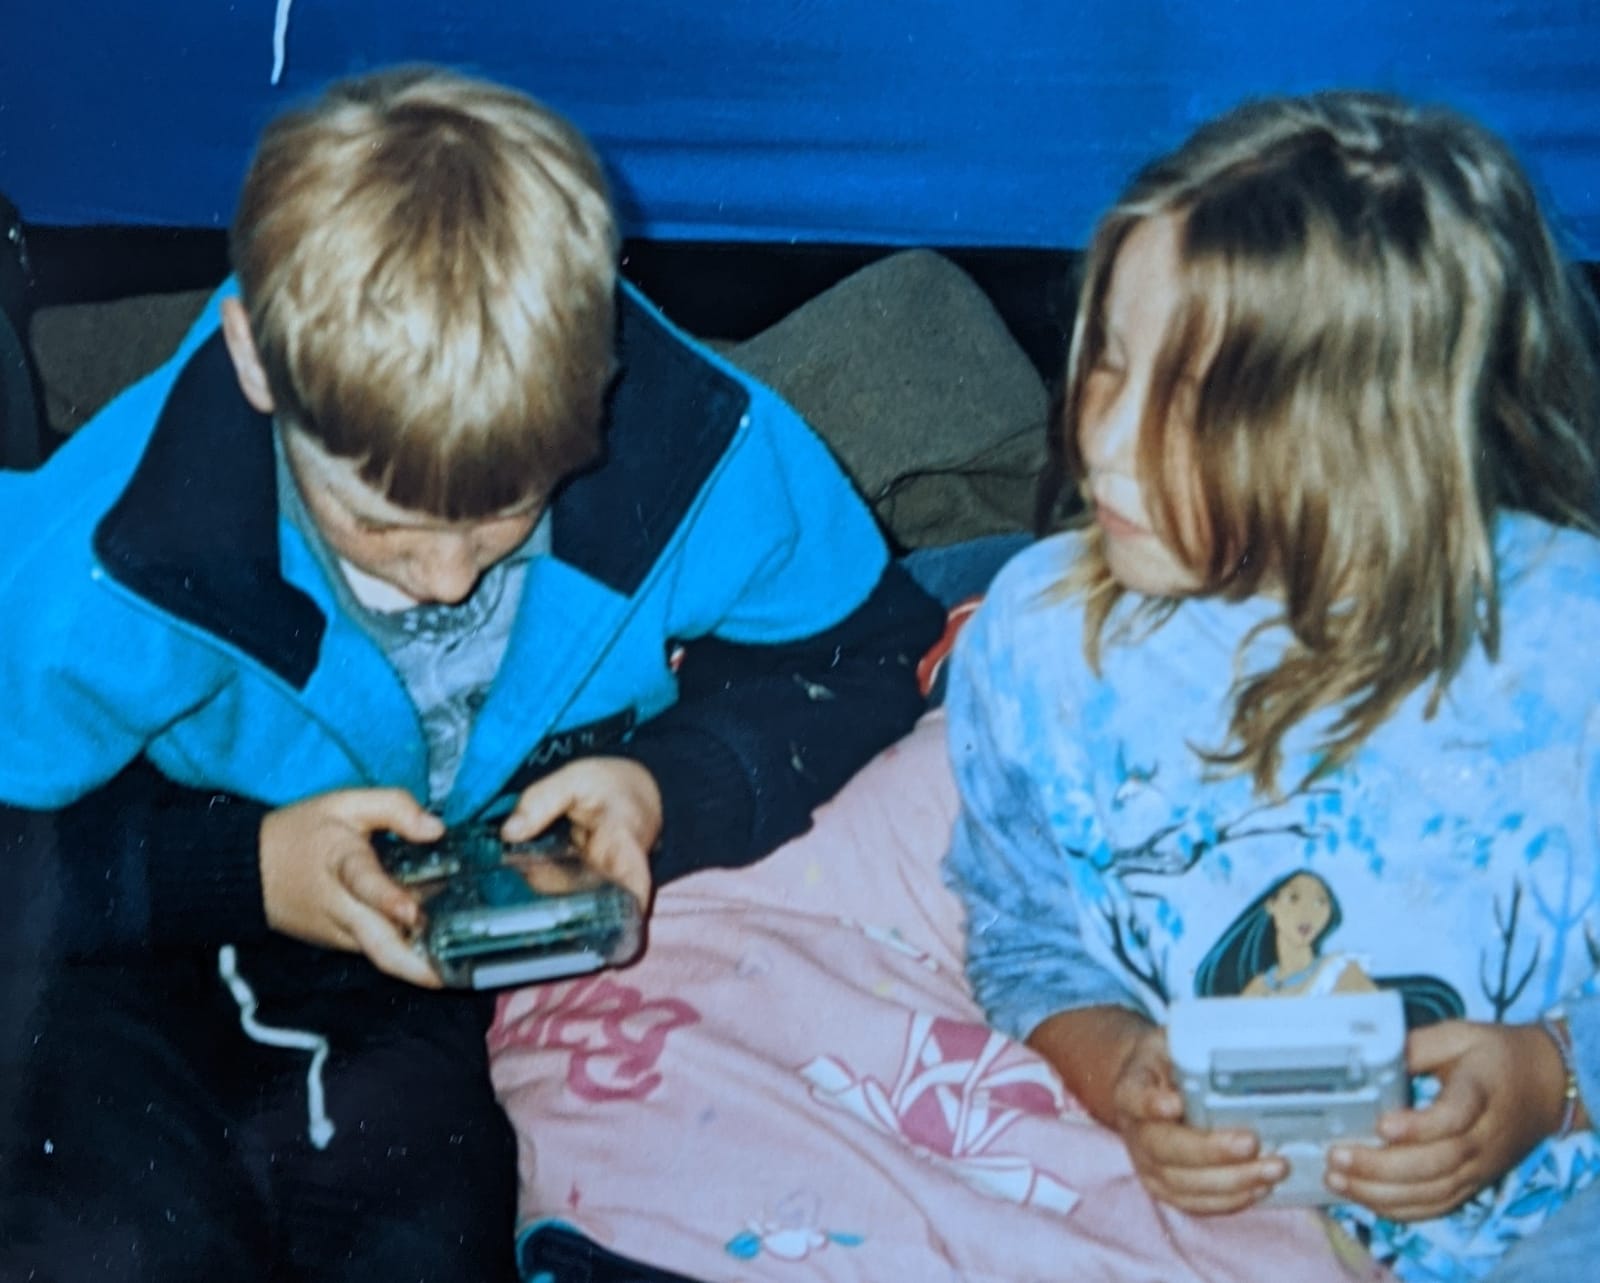 Me playing my GameBoy